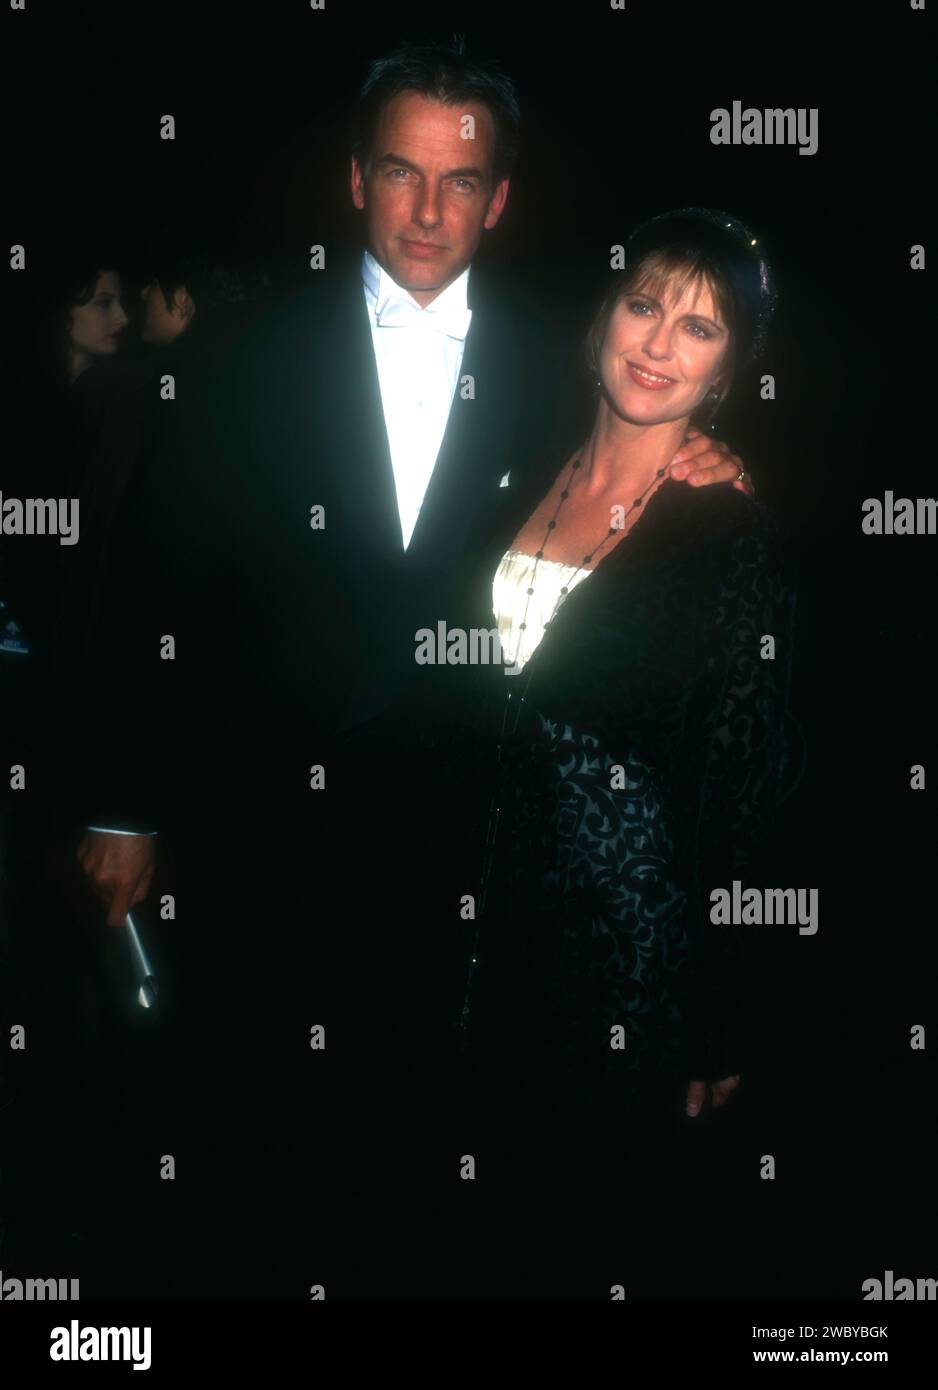 Los Angeles, California, USA 16th November 1996 Actor Mark Harmon and Actress Pam Dawber attend the 18th Annual CableACE Awards at The Wiltern on November 16, 1996 in Los Angeles, California, USA. Photo by Barry King/Alamy Stock Photo Stock Photo